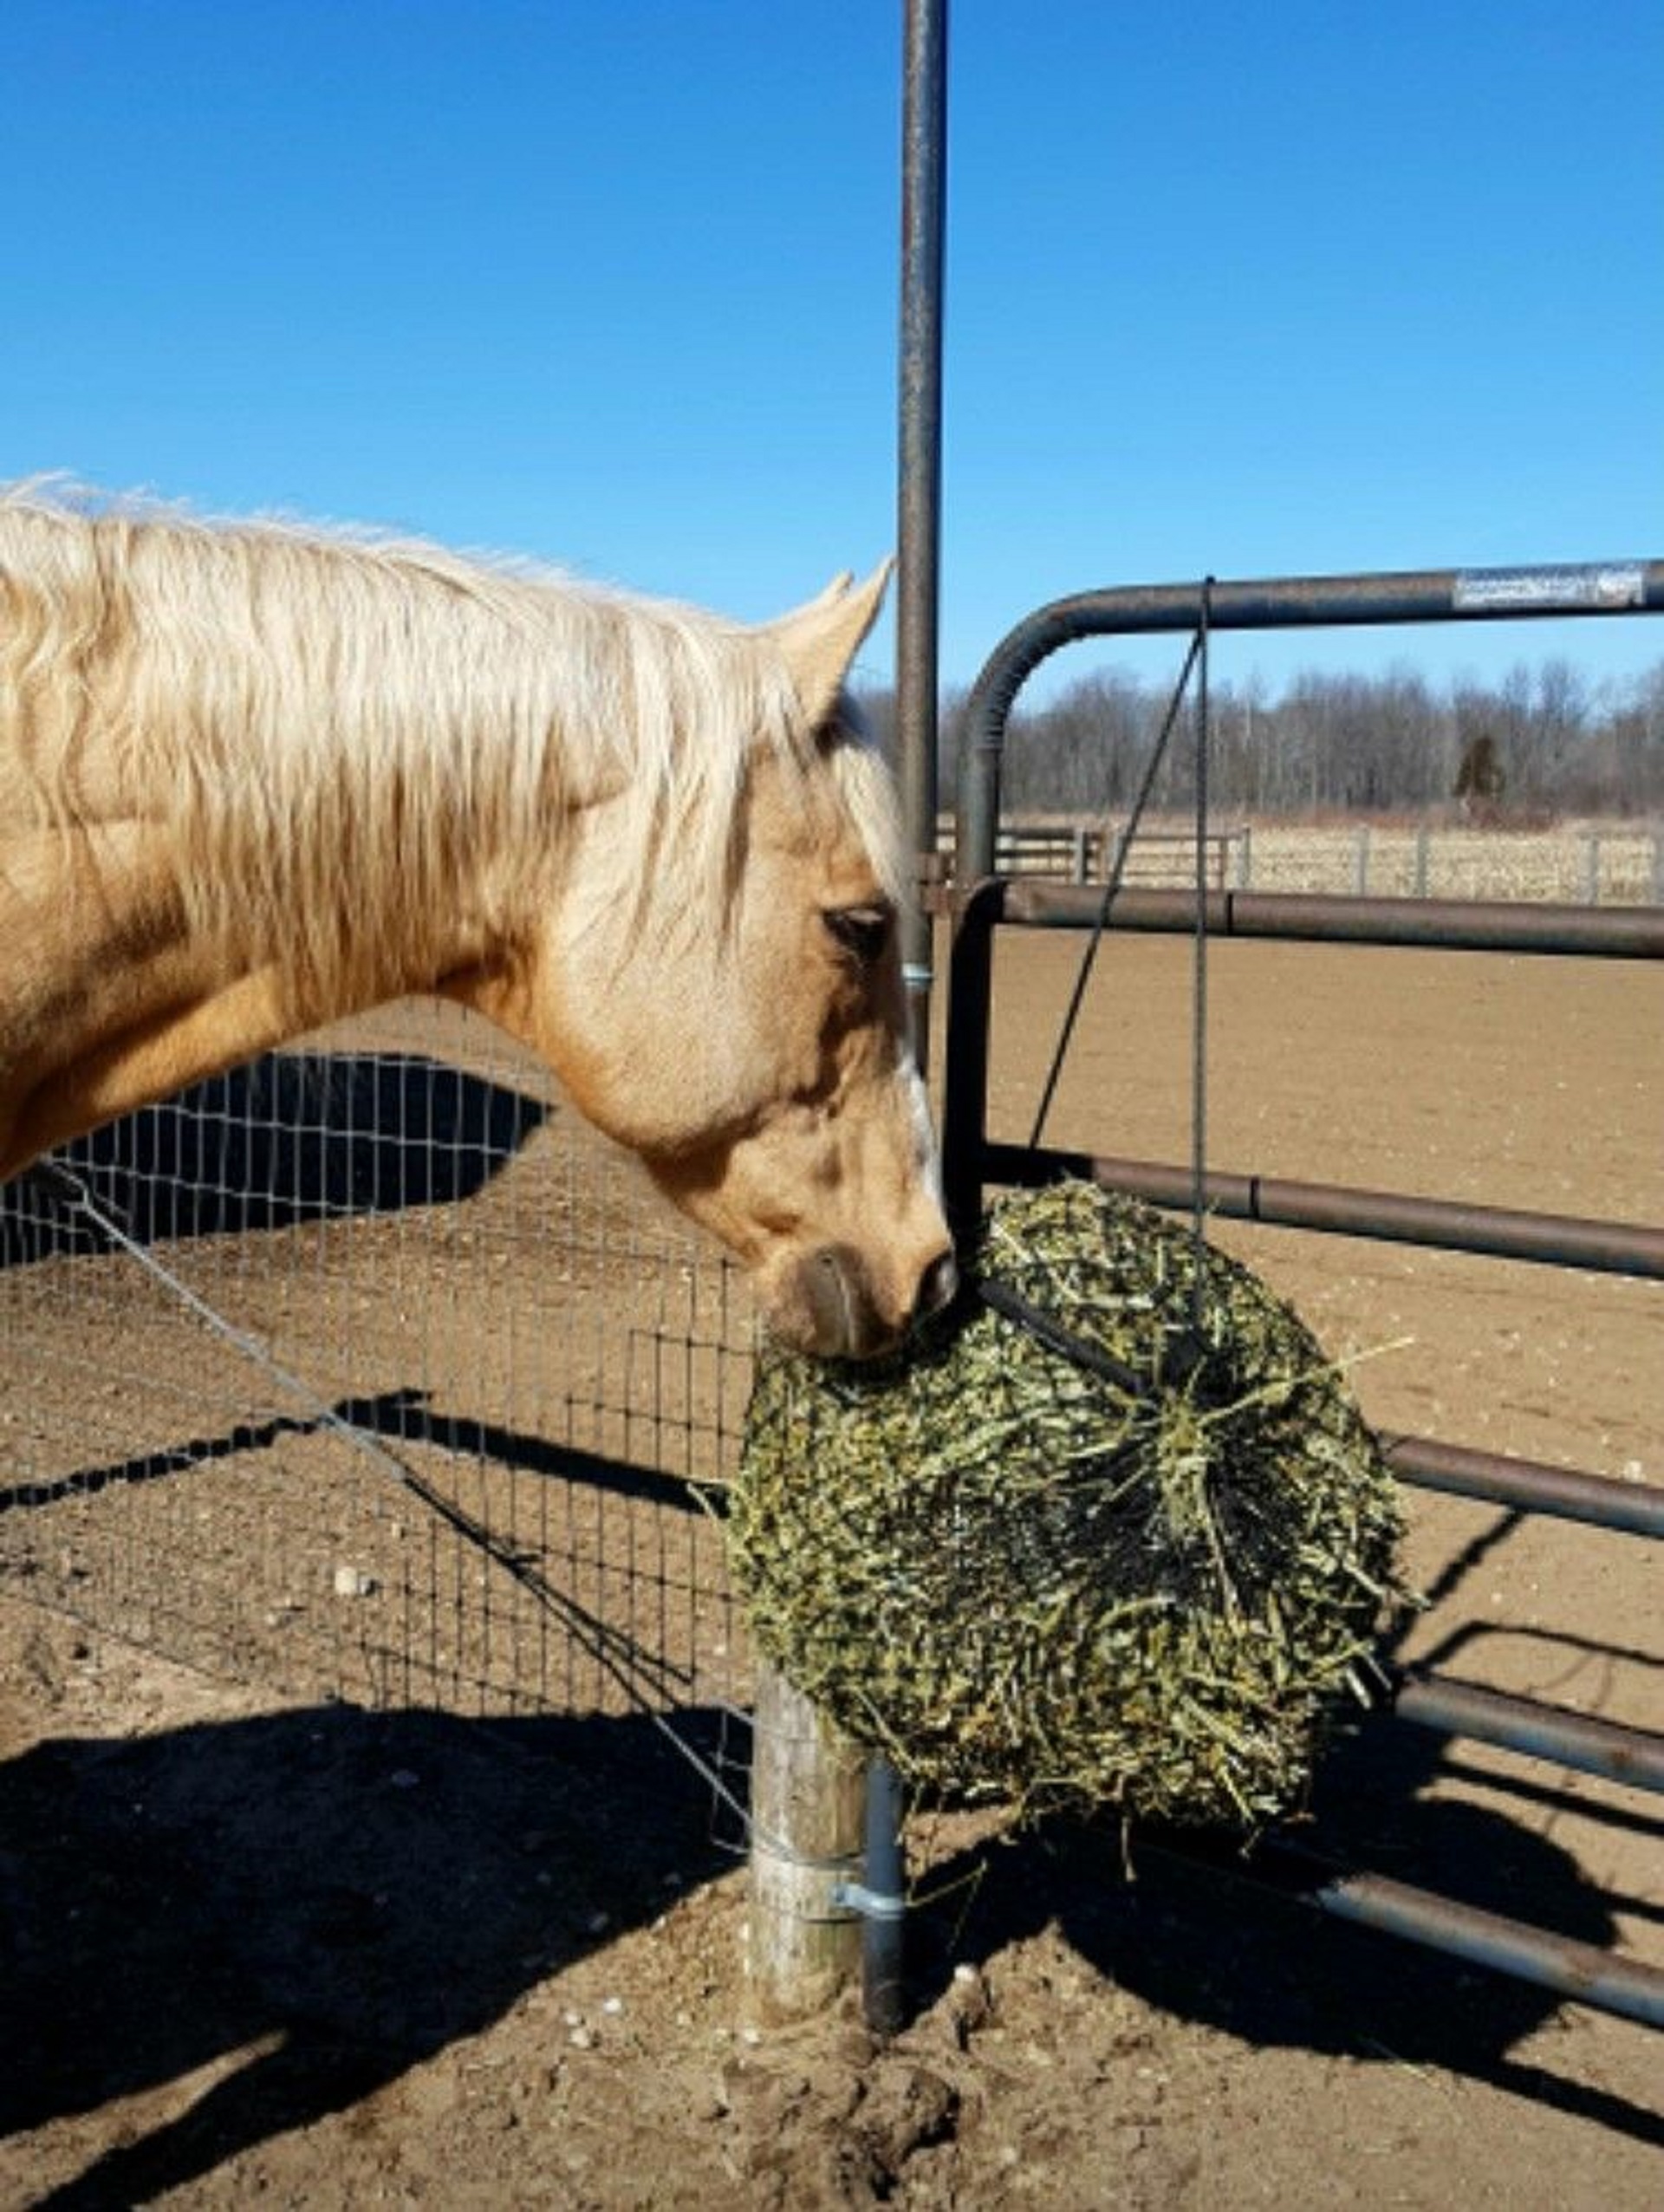 SMALL HAY NET FOR SNACKING - 1-2 FLAKES OF HAY